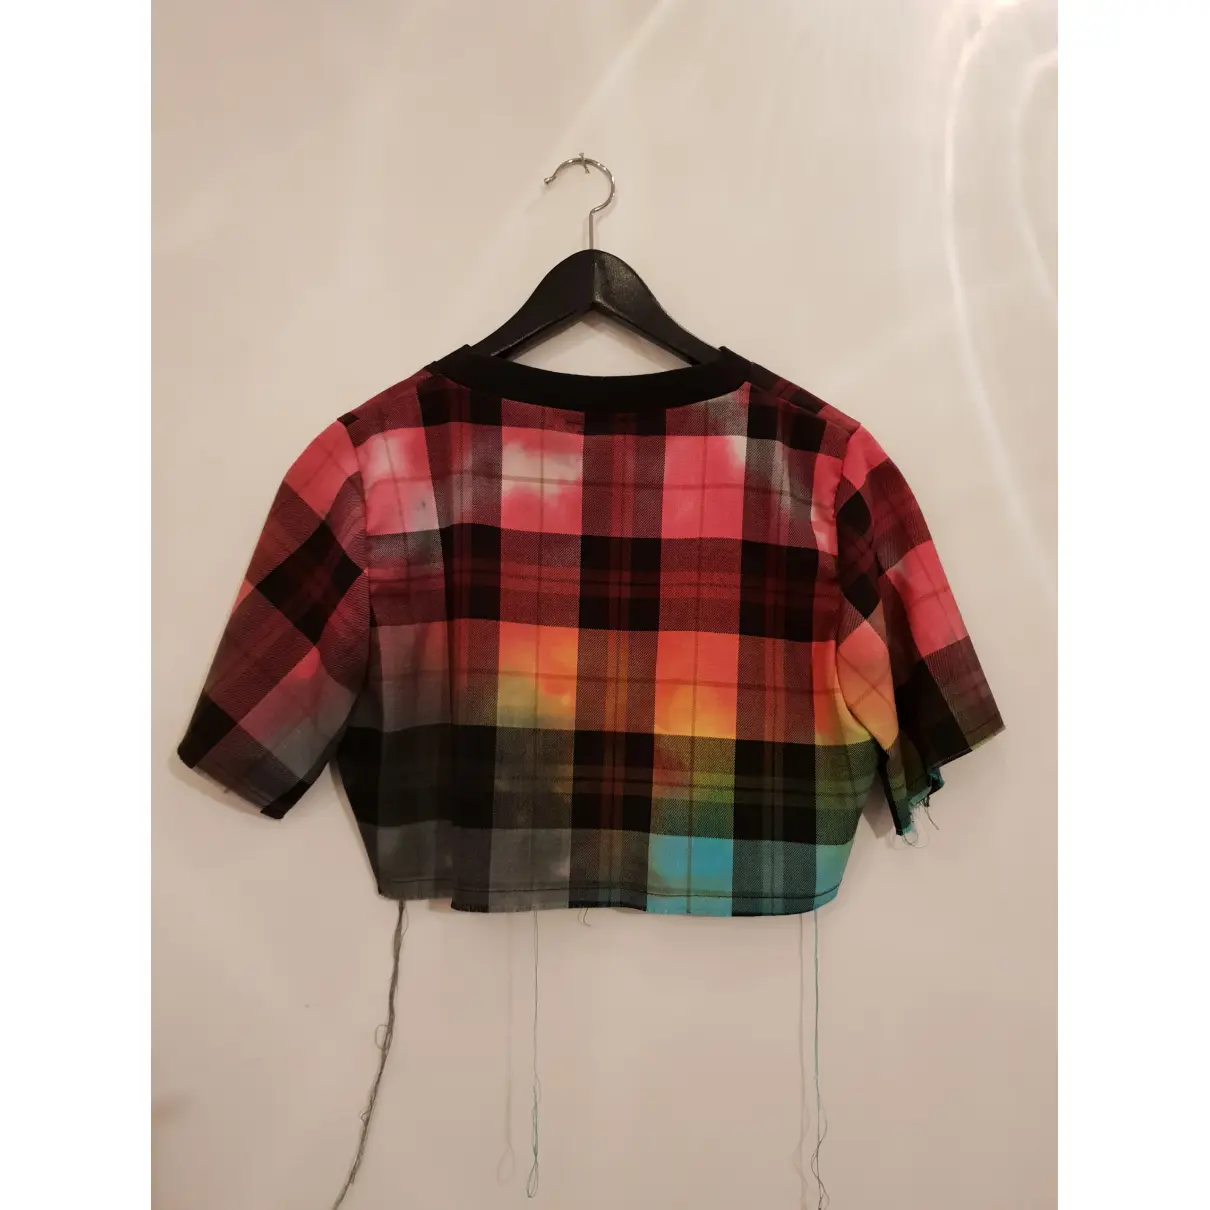 Buy The Ragged Priest Multicolour Cotton Top online